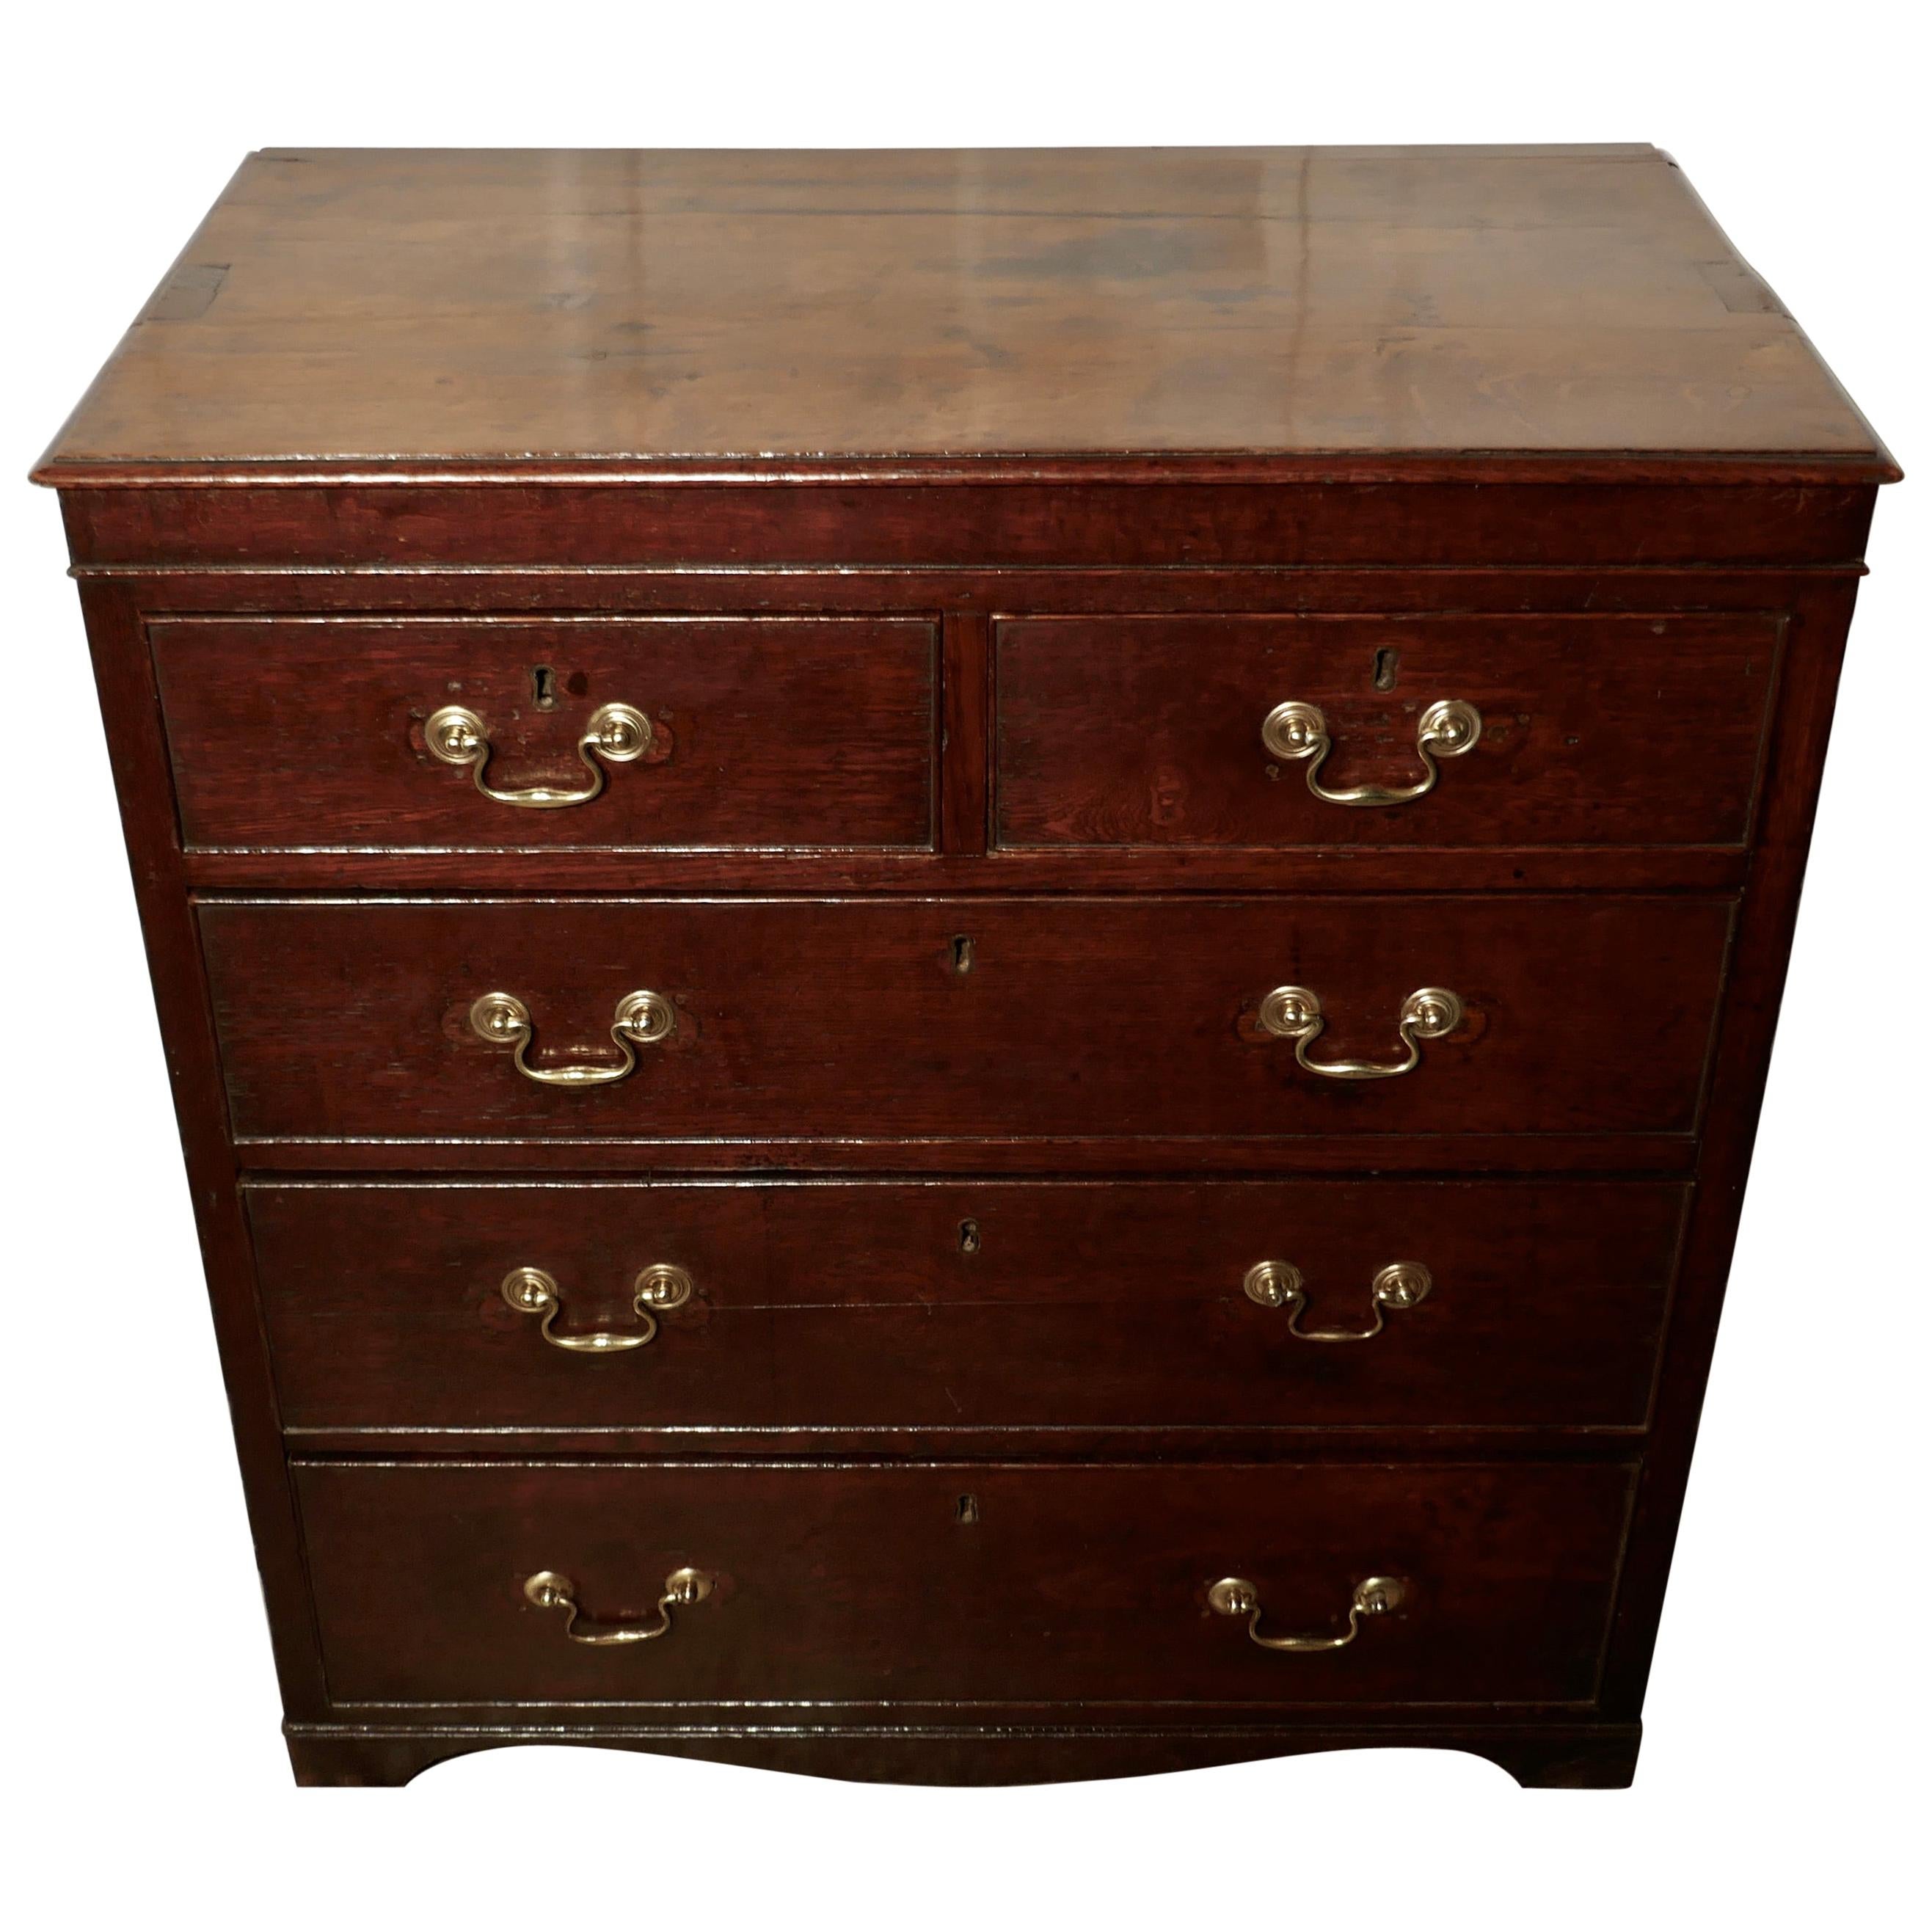 Period Oak Chest of Drawers